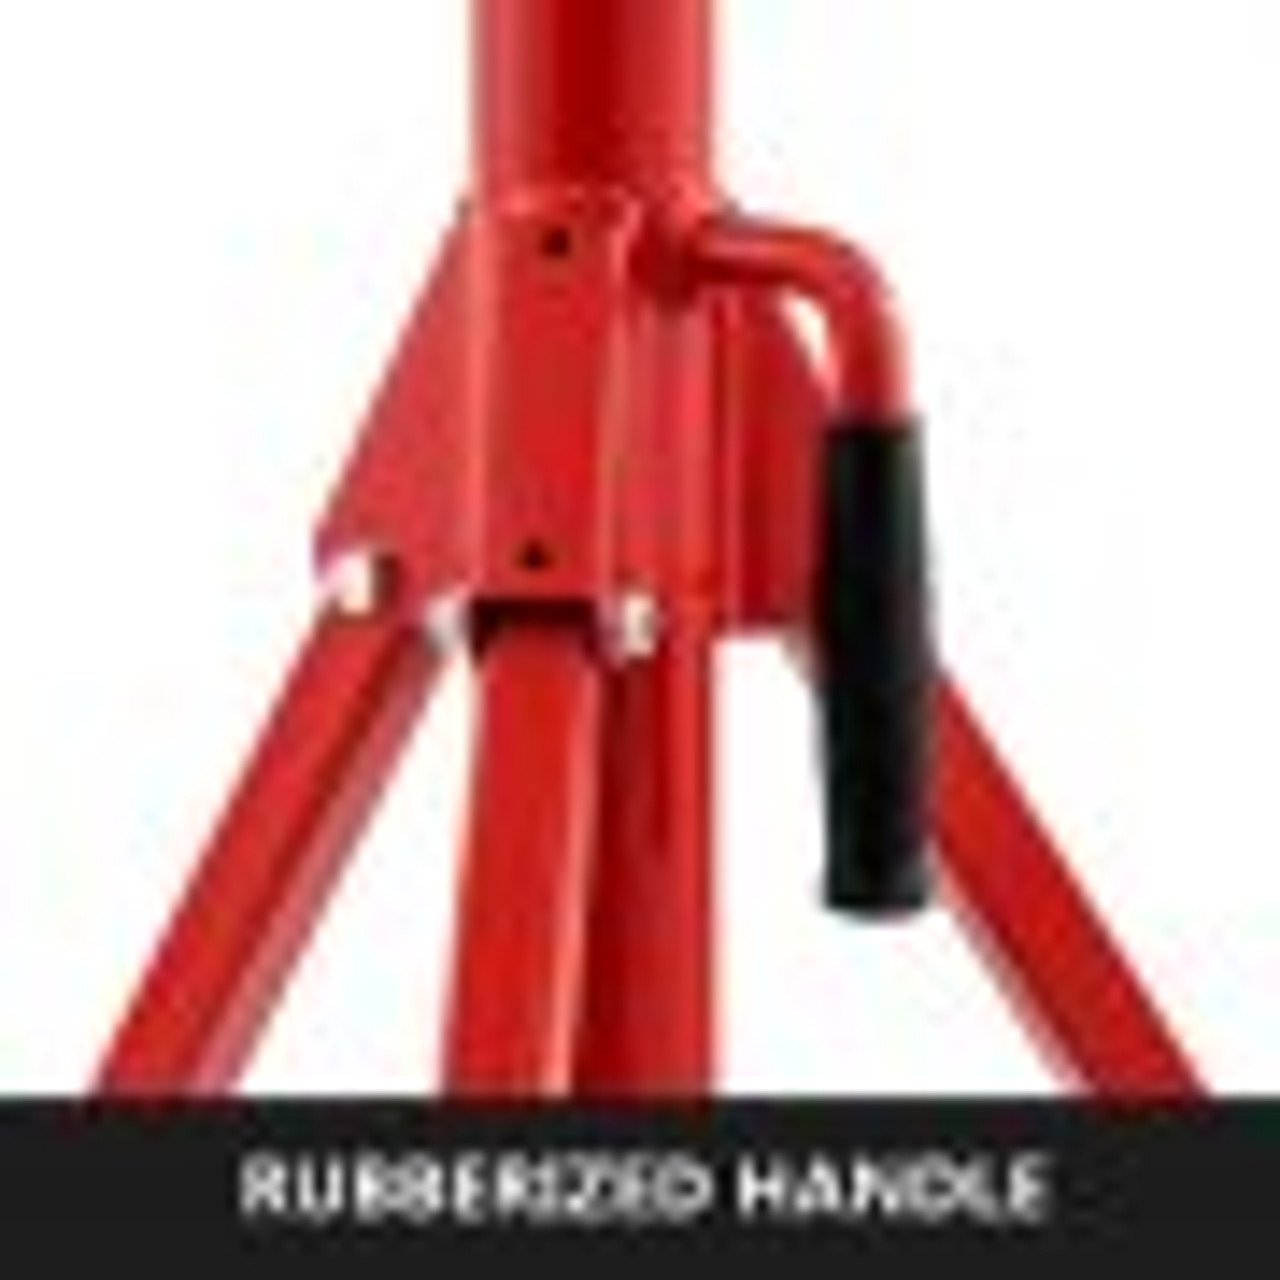 Pipe Jack Stand with 4-Ball Transfer V-Head 6mm Thickness and Folding Legs 1500LB Welding Pipe Stand Adjustable Height 28-52IN 1107S-type Pipe Jacks for Welding